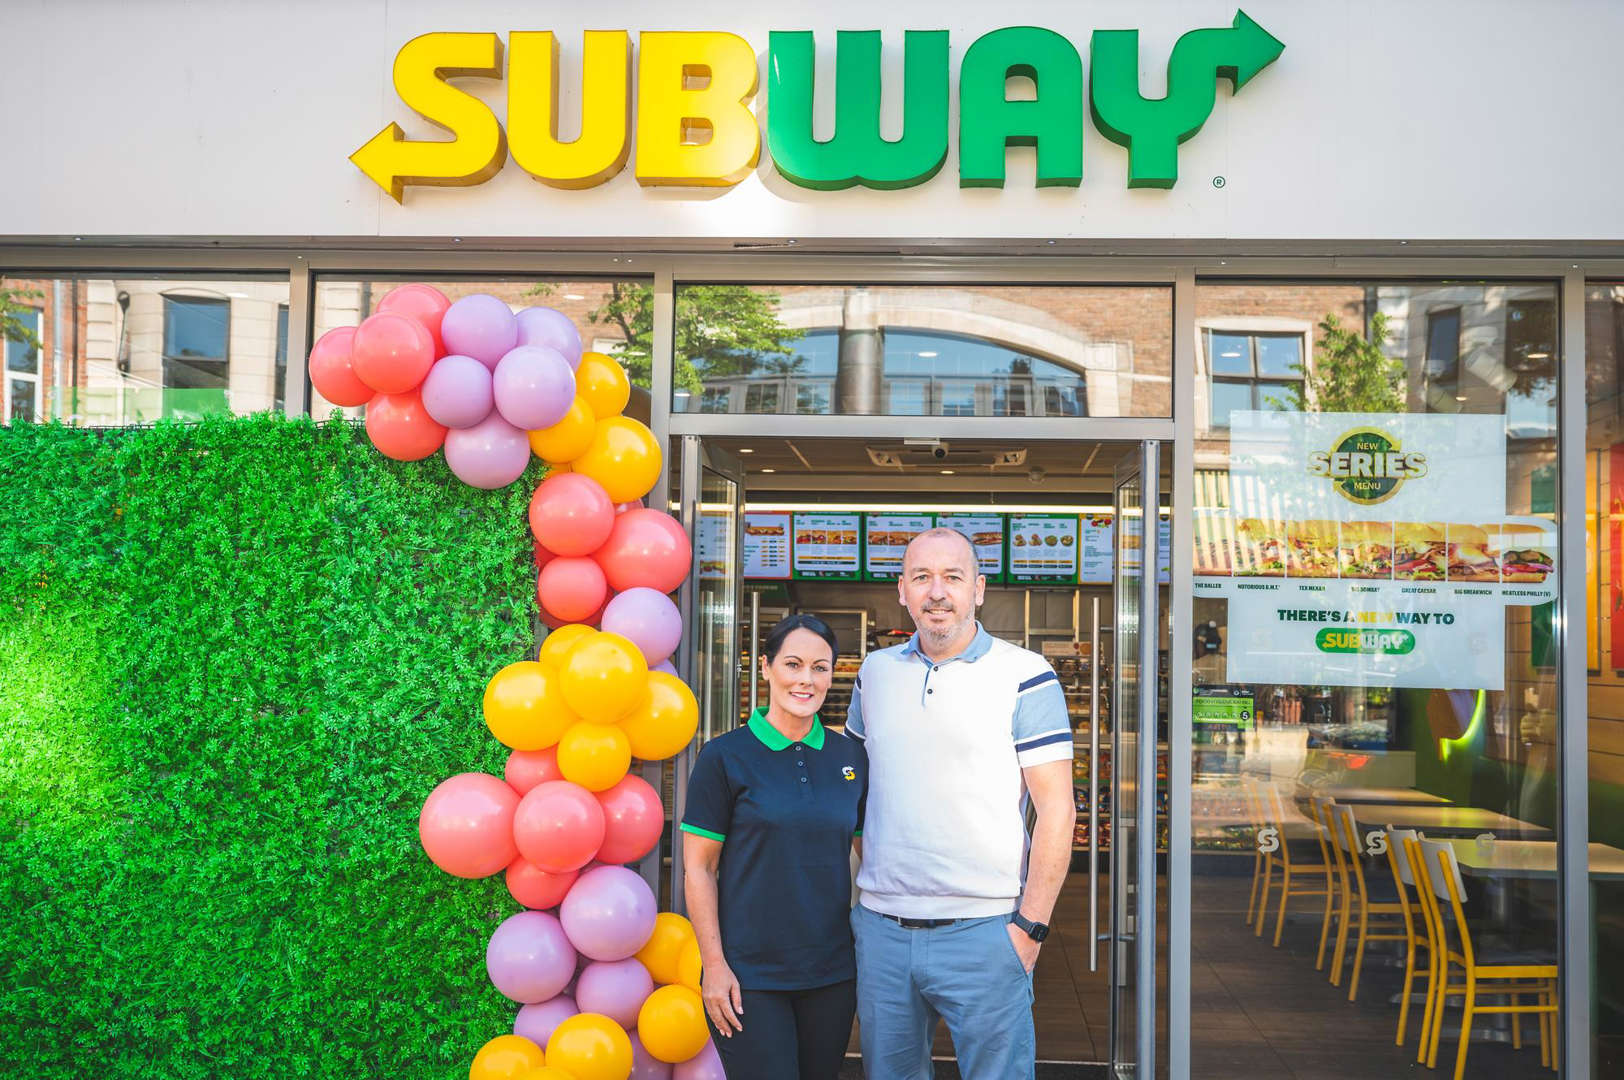 Subway celebrates 25 years in Northern Ireland with first restaurant opened on Botanic Avenue in Belfast